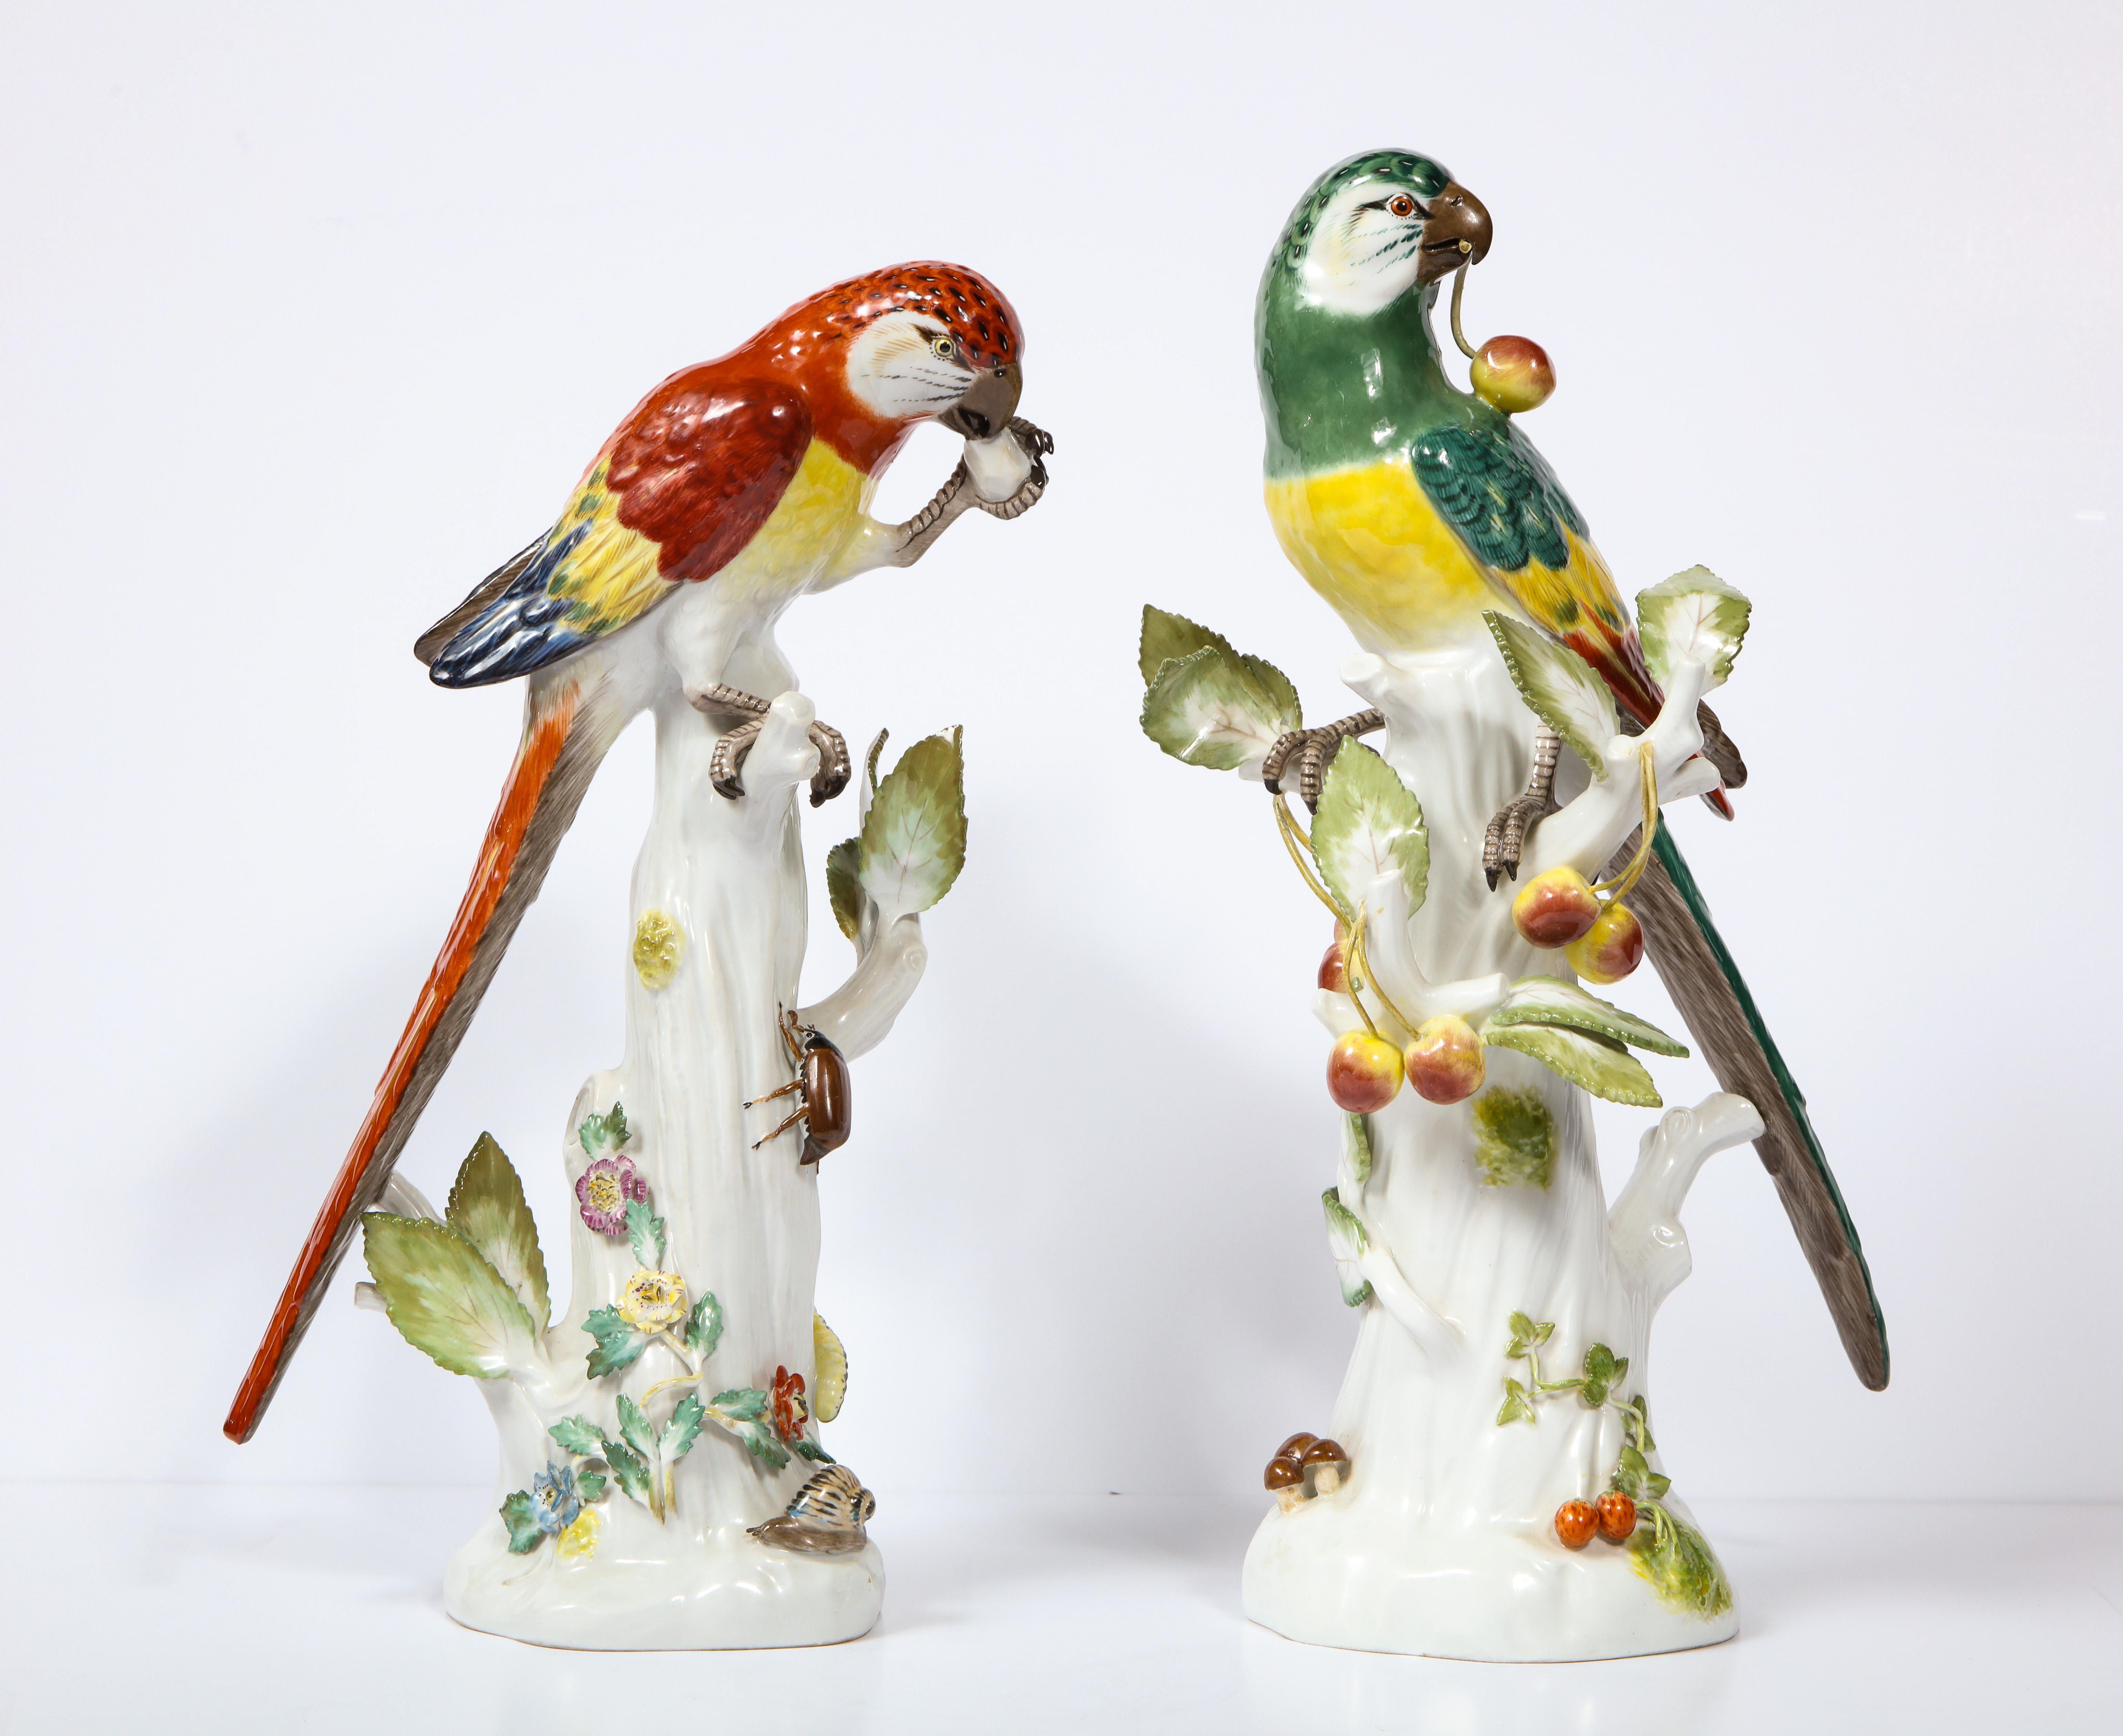 A fine pair of antique Meissen Porcelain figures of colorful parrots, each standing on a tree branch after a model by J. J. Kandler. One parrot is eating fruit while the other parrot bearing beautiful leaves on its branches is glaring into the